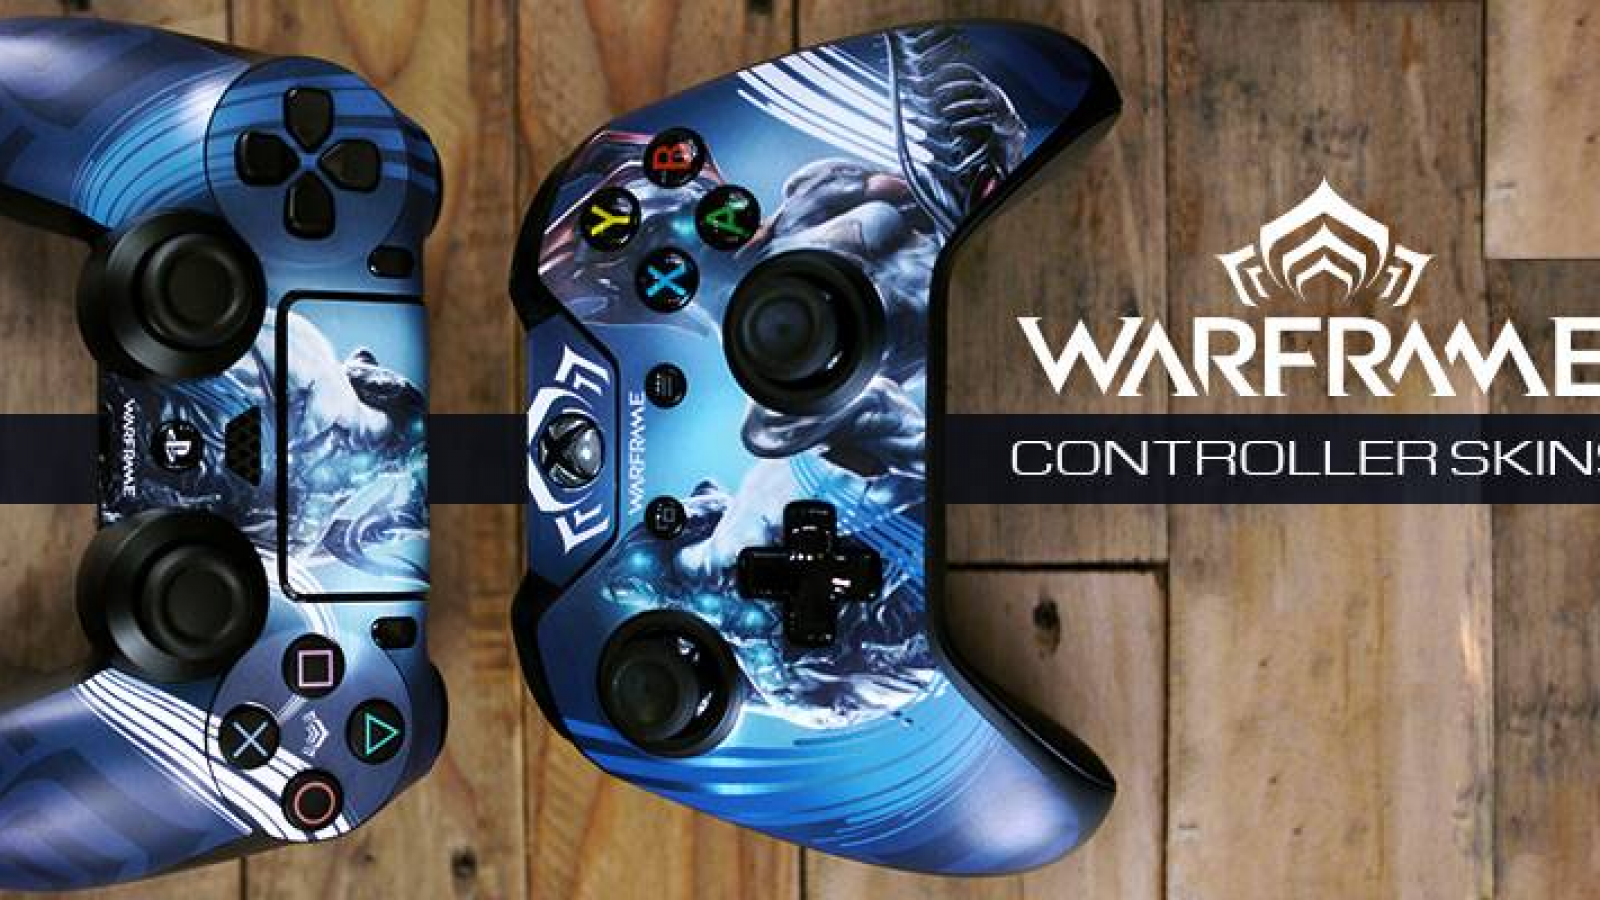 Warframe Controller Skins available now!